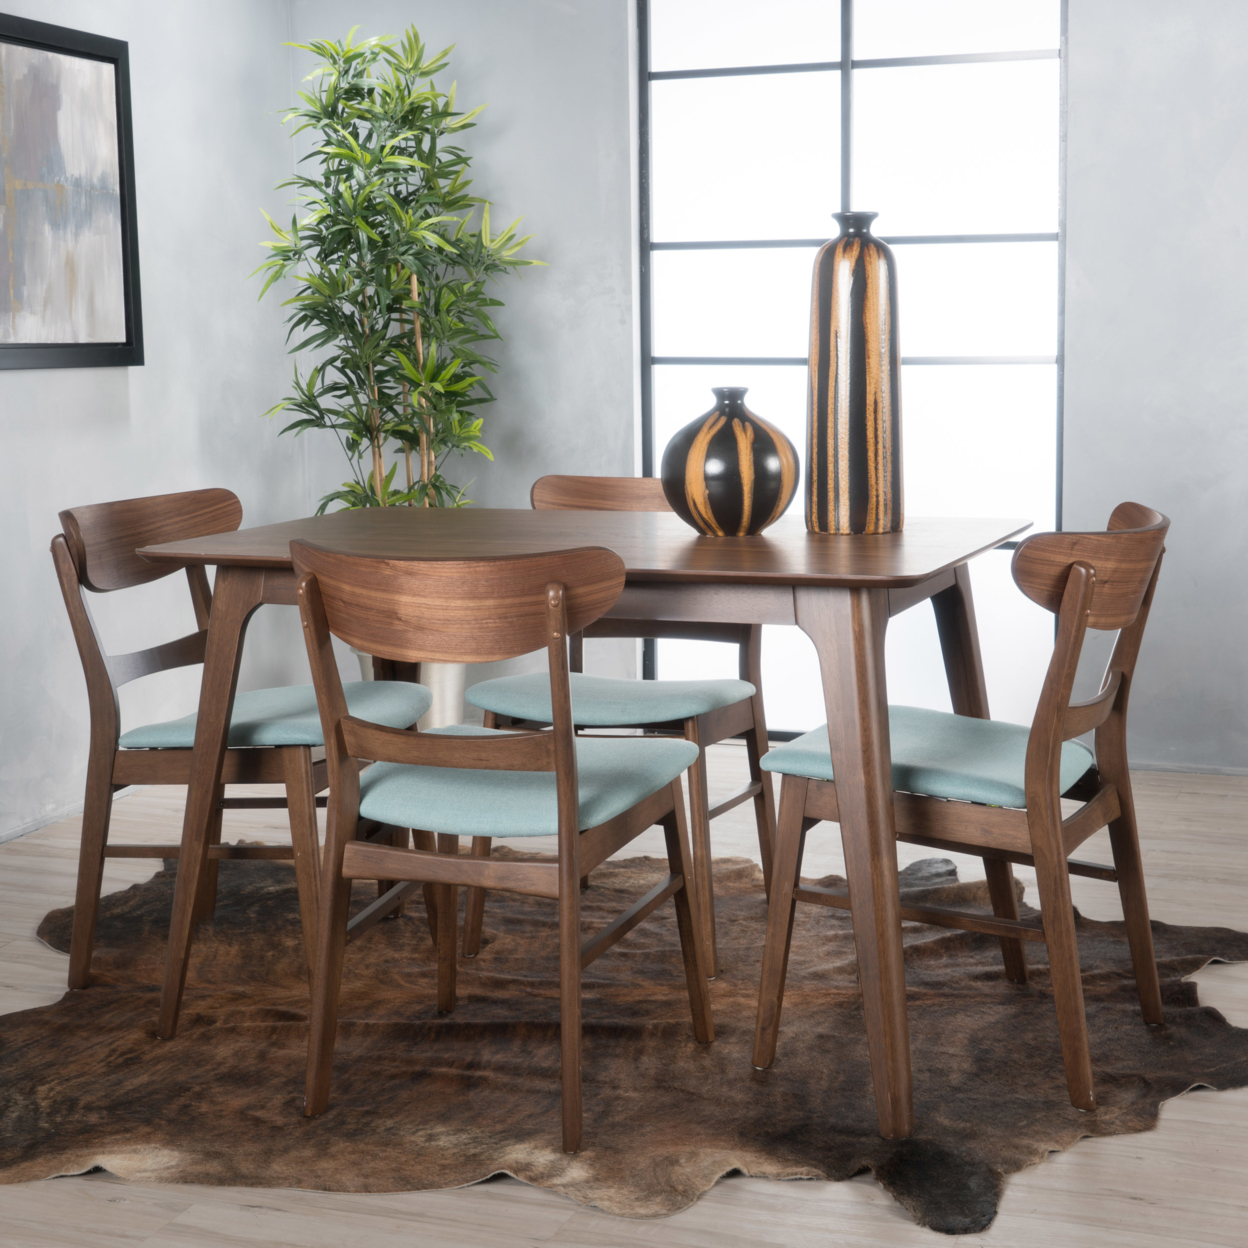 Colonial Mid-Century Modern 5 Piece Dining Set With 50-Inch Rectangular Table - Mint